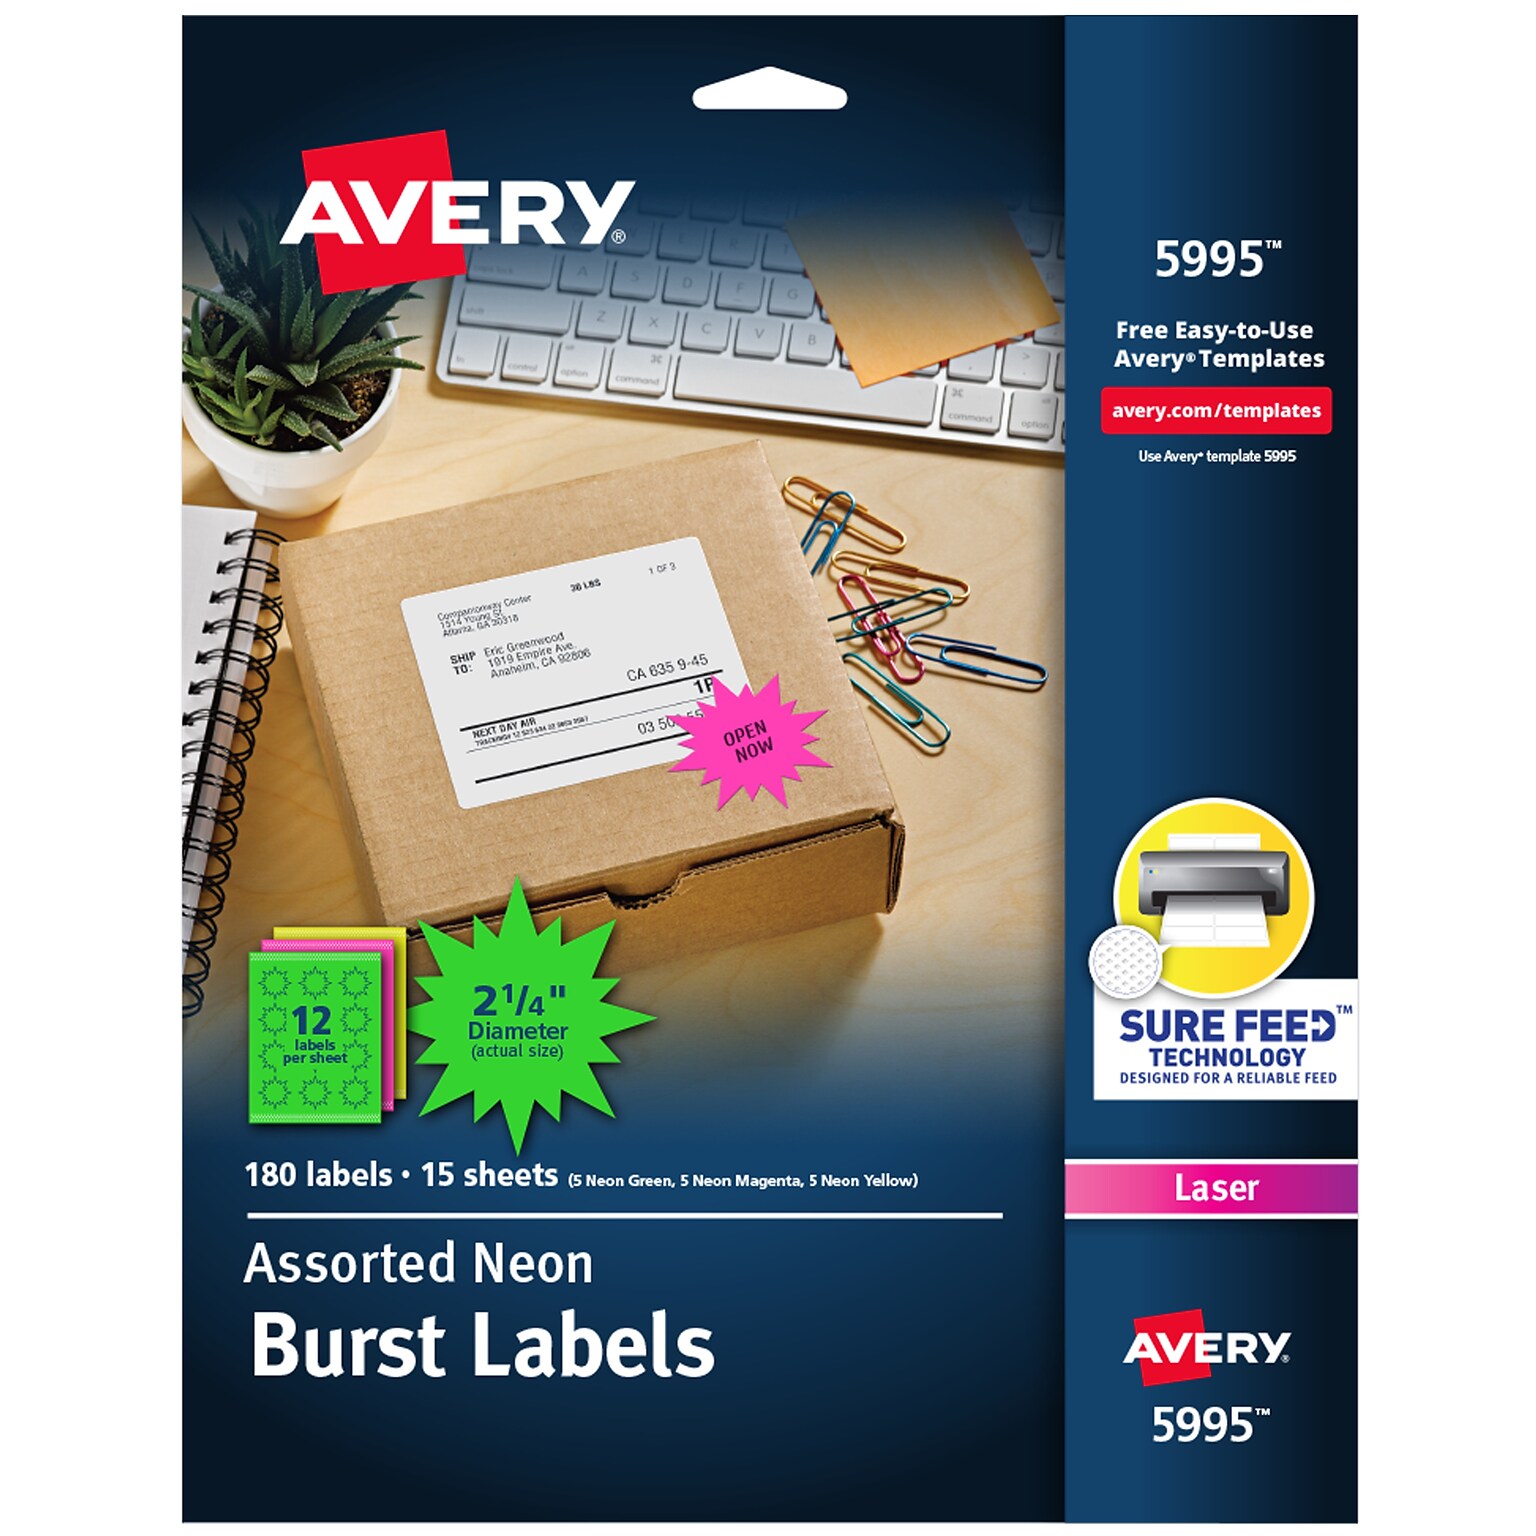 Avery Sure Feed Laser Burst Label, 2 1/4 Diameter, Assorted Neon, 12 Labels/Sheet, 15 Sheets/Pack (5995)